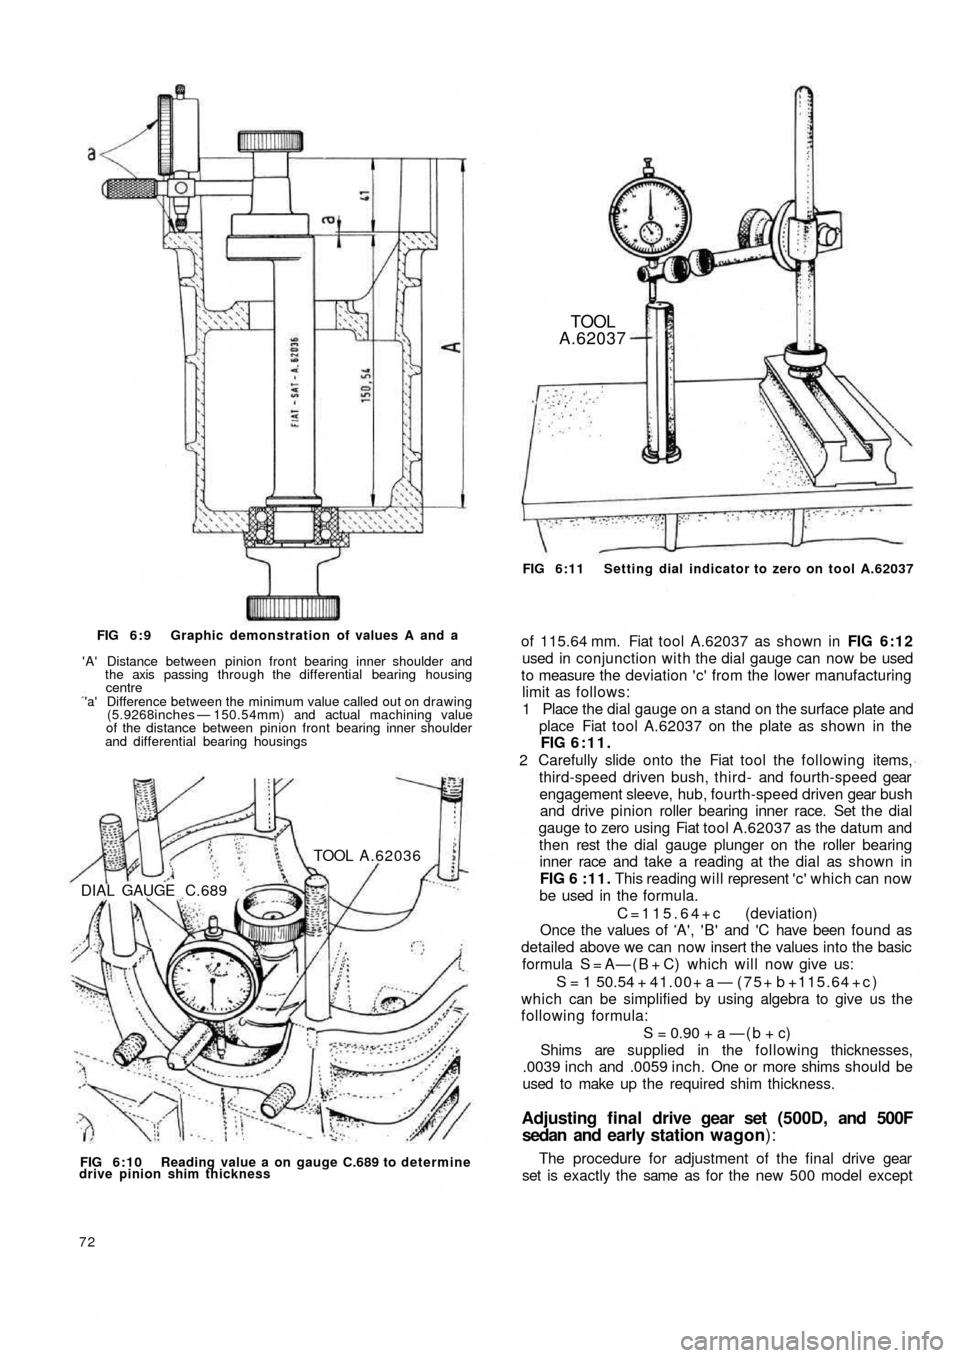 FIAT 500 1971 1.G Repair Manual FIG 6:9  Graphic demonstration of values A and a
A Distance between pinion front bearing inner shoulder and
the axis passing through the differential bearing housing
centrea Difference between the